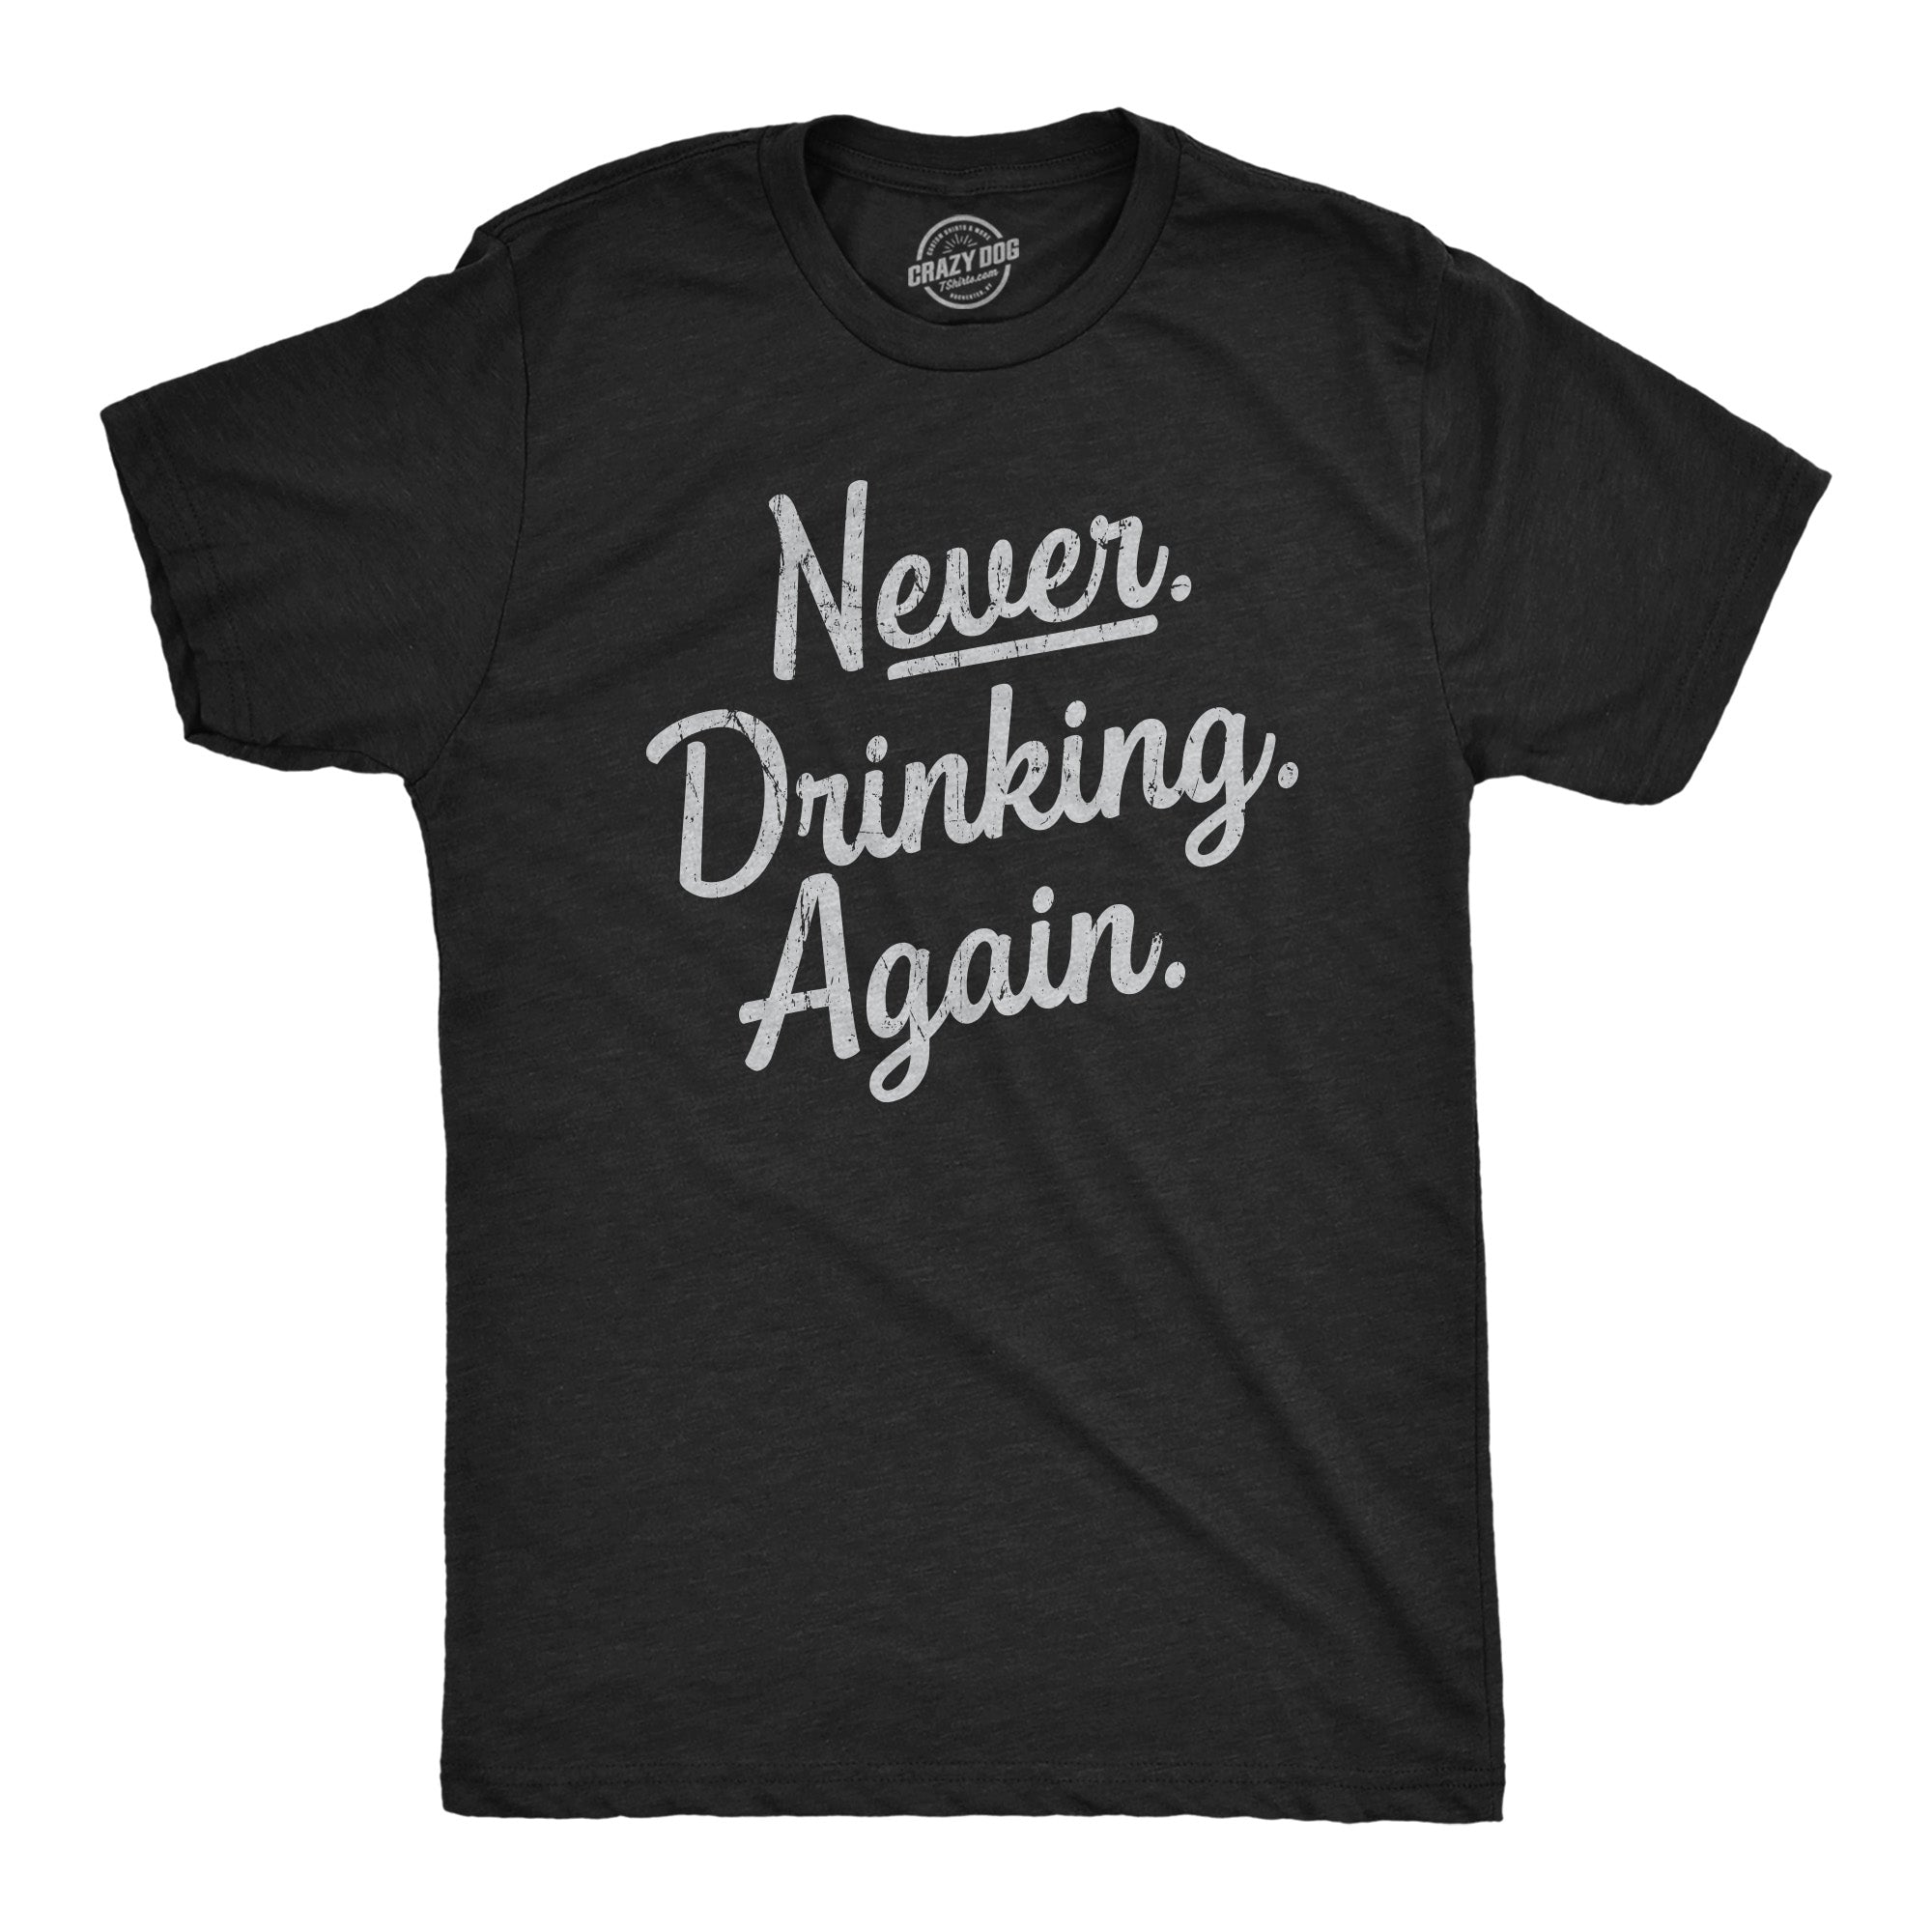 Funny Heather Black - NEVER Never Drinking Again Mens T Shirt Nerdy Drinking sarcastic Tee